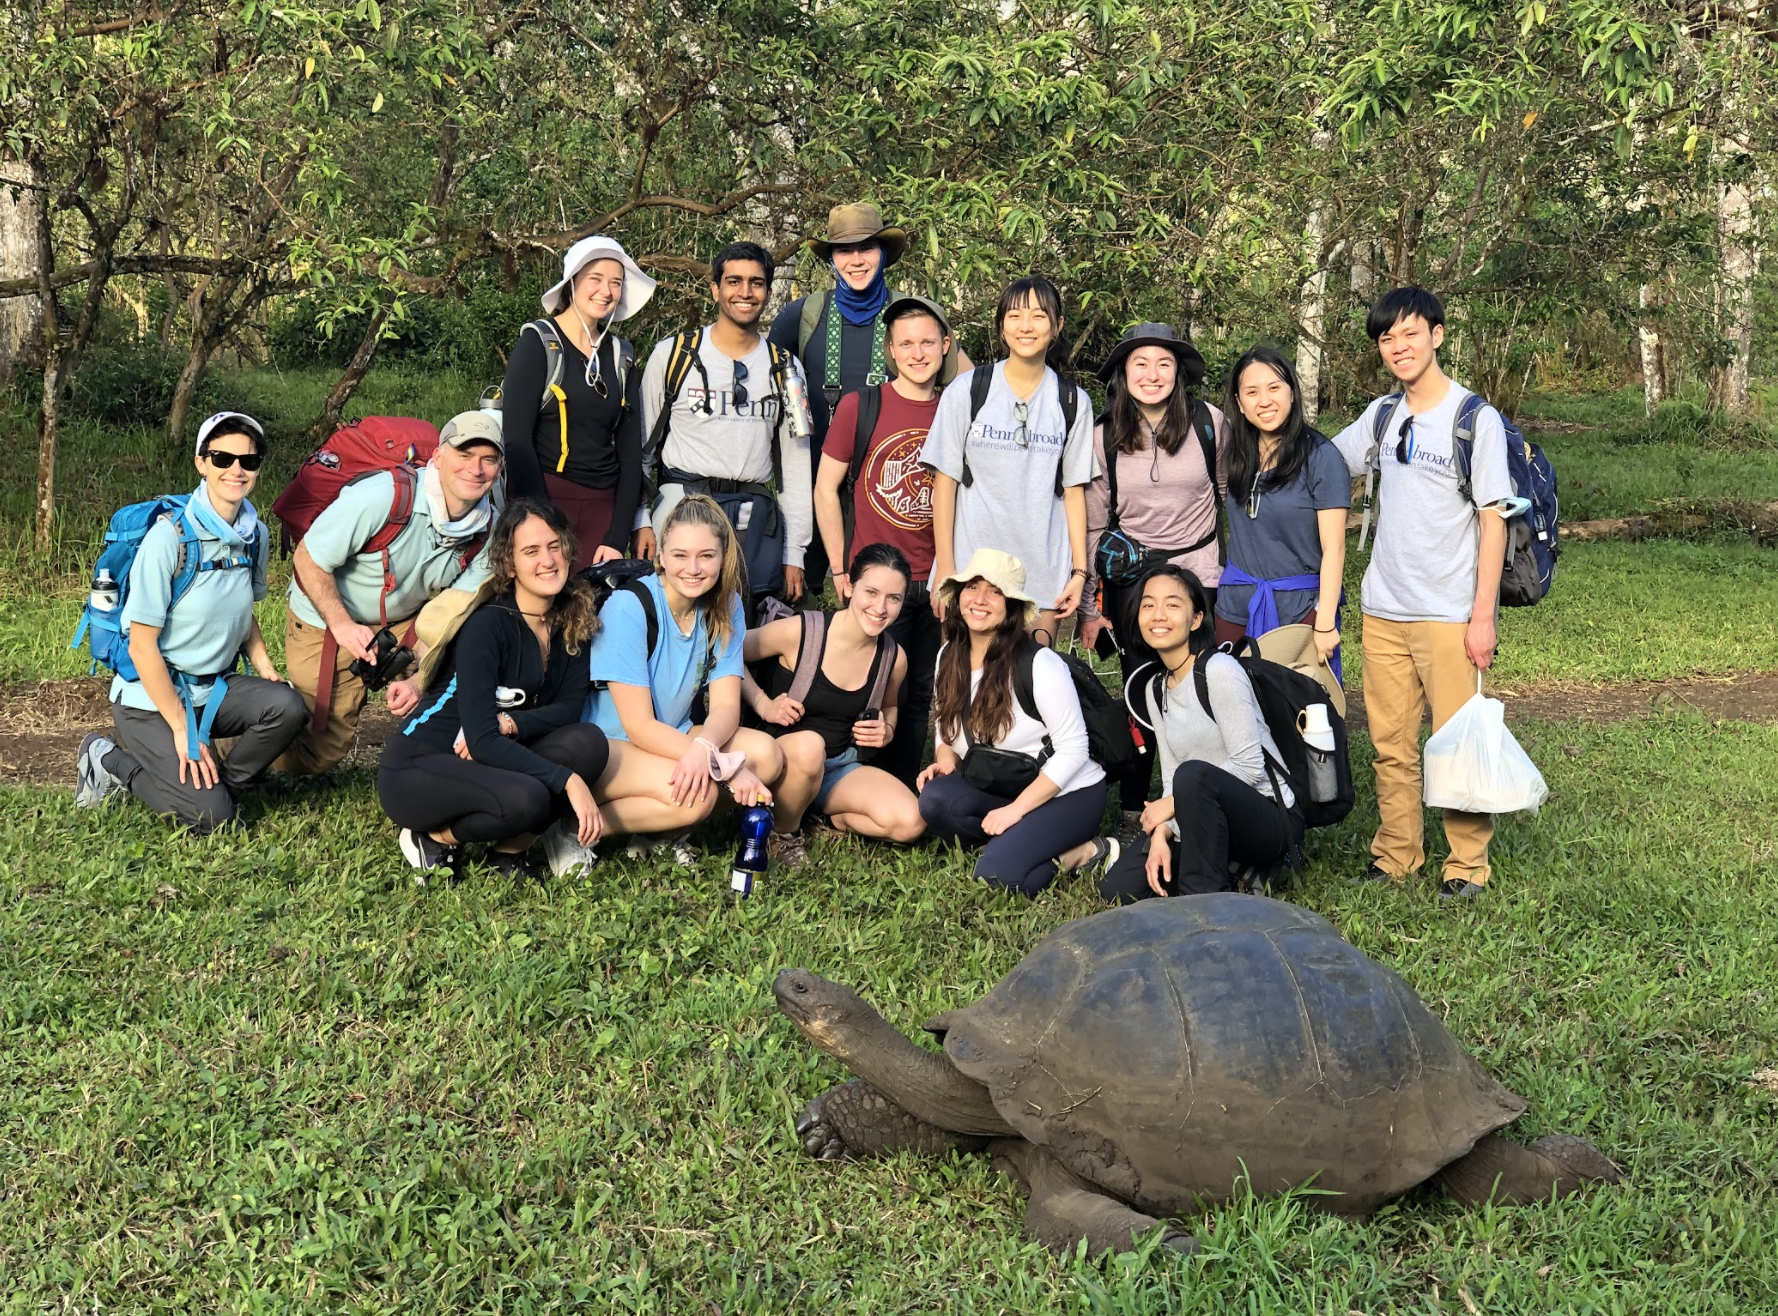 A group of Penn Abroad students in Galapagos smile for the camera as a turtle walks past them on the grass.